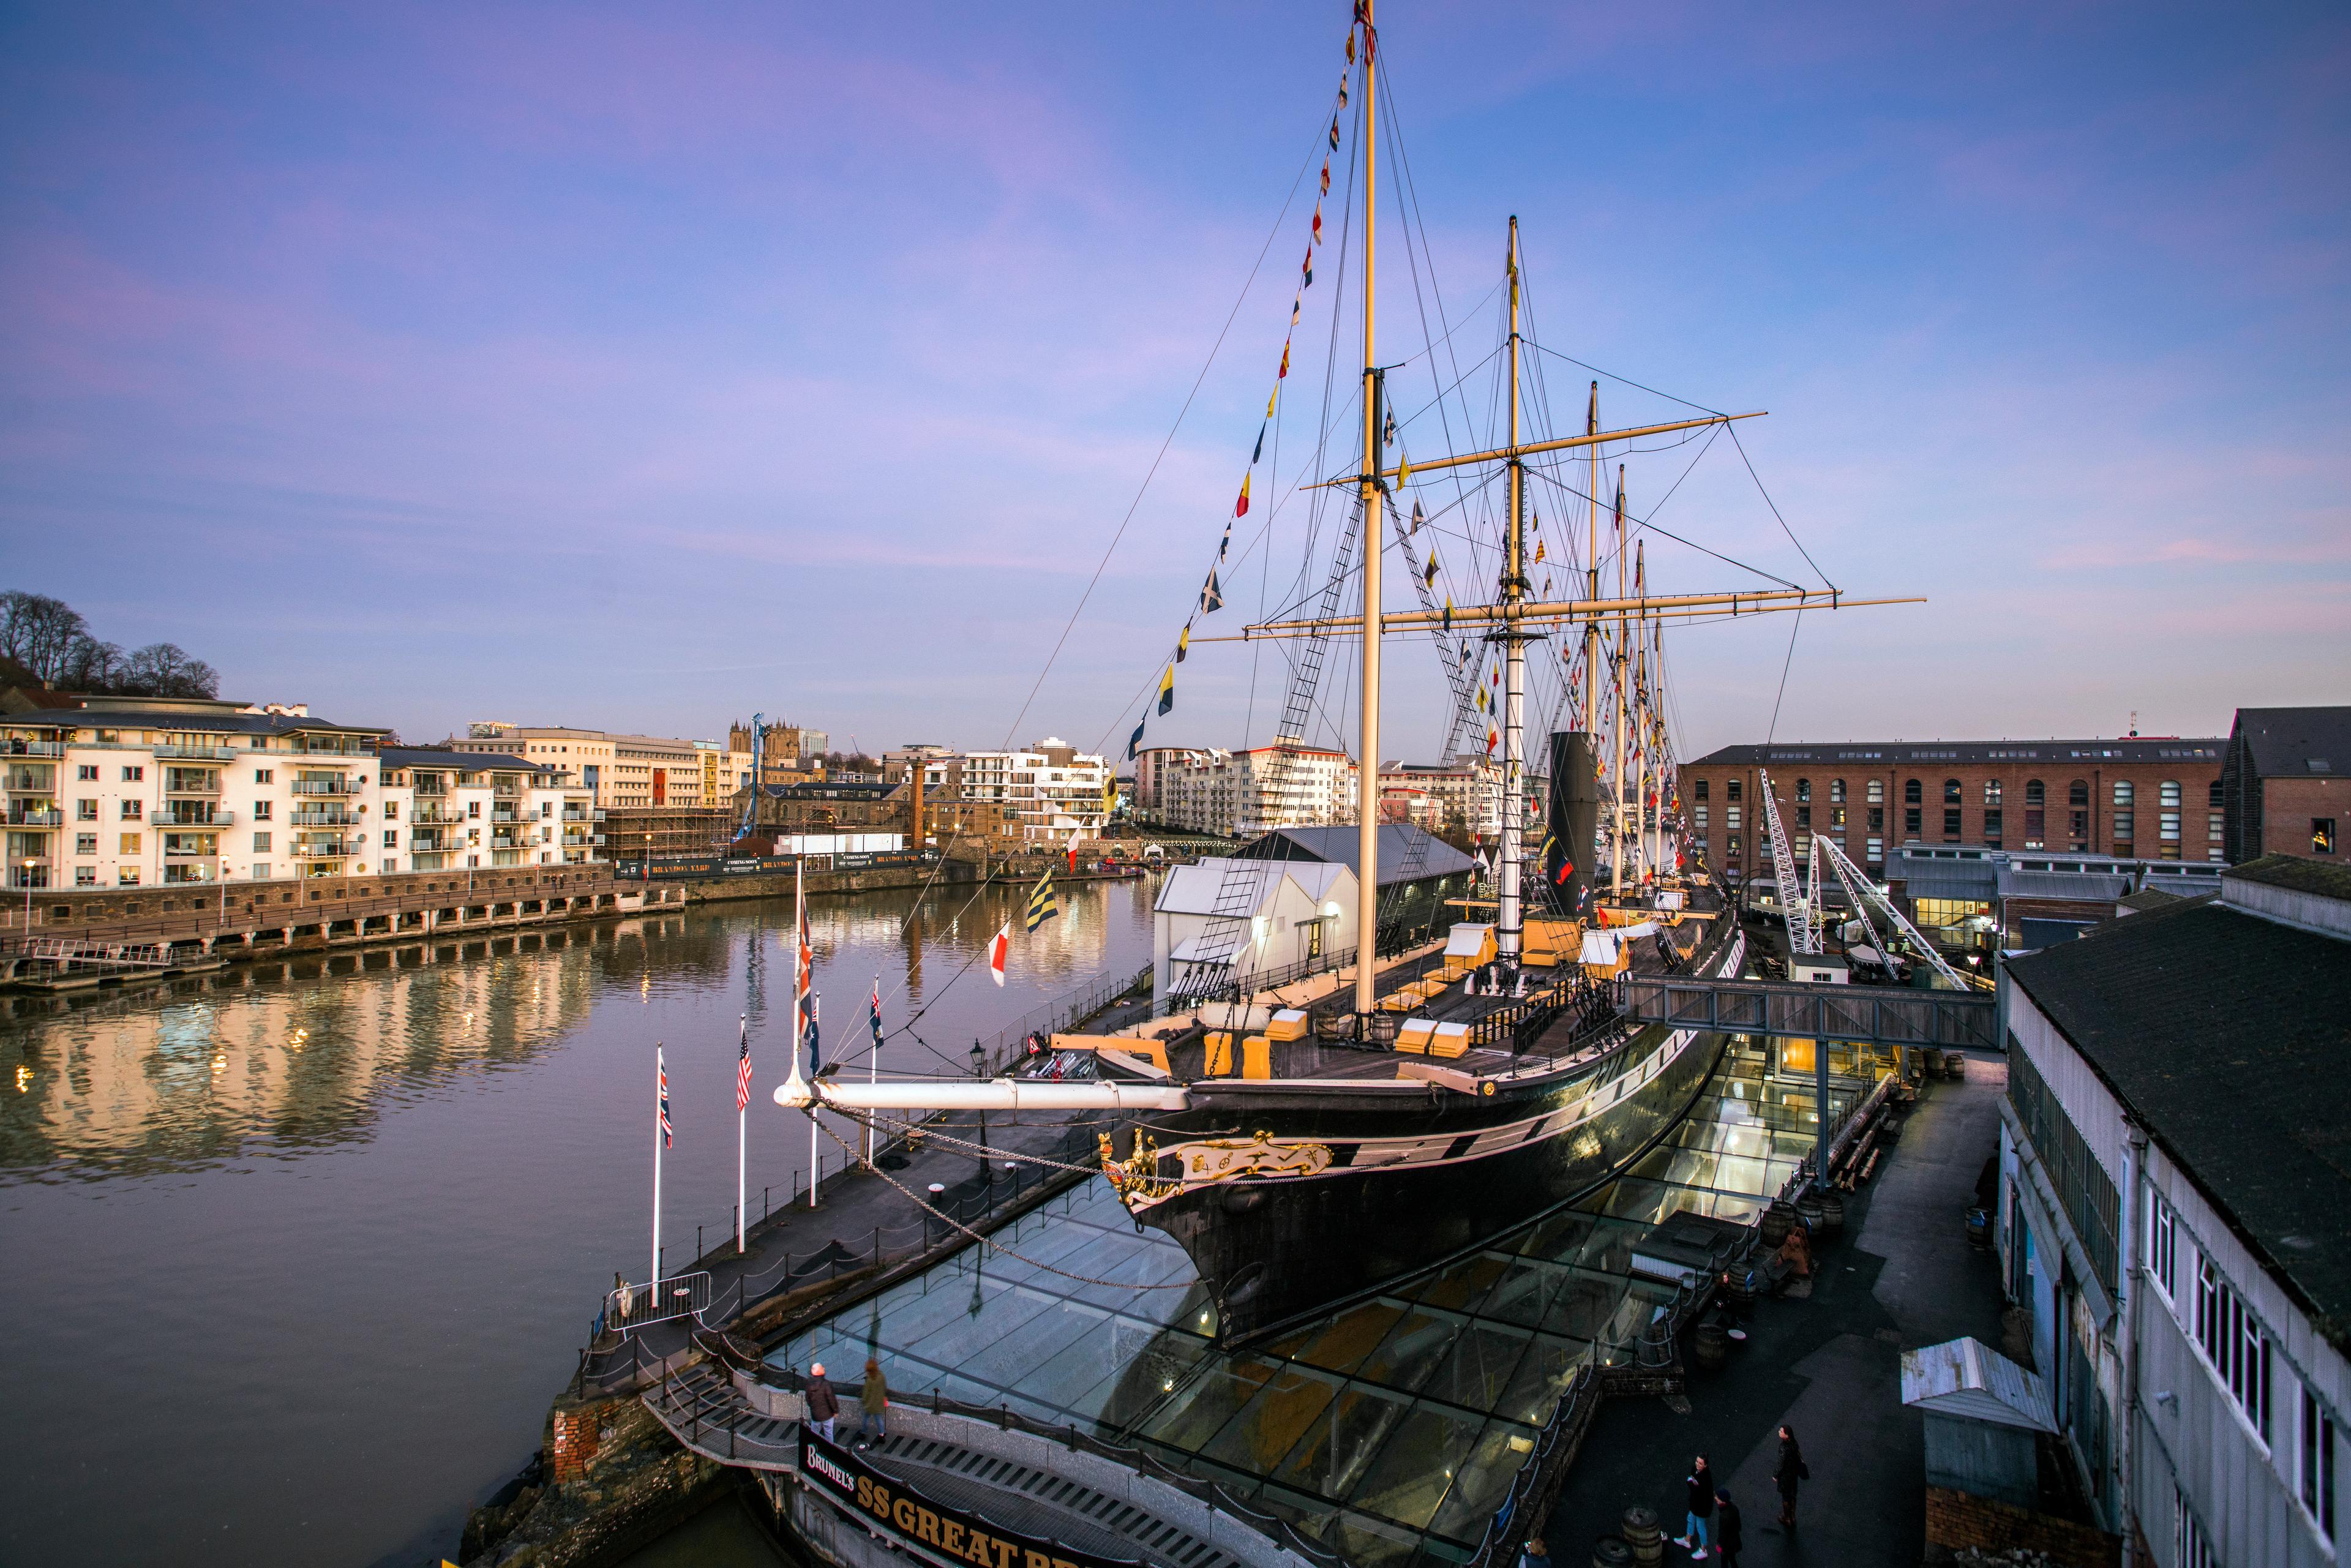 Brunel's Ss Great Britain, Brunel's Ss Great Britain photo #2